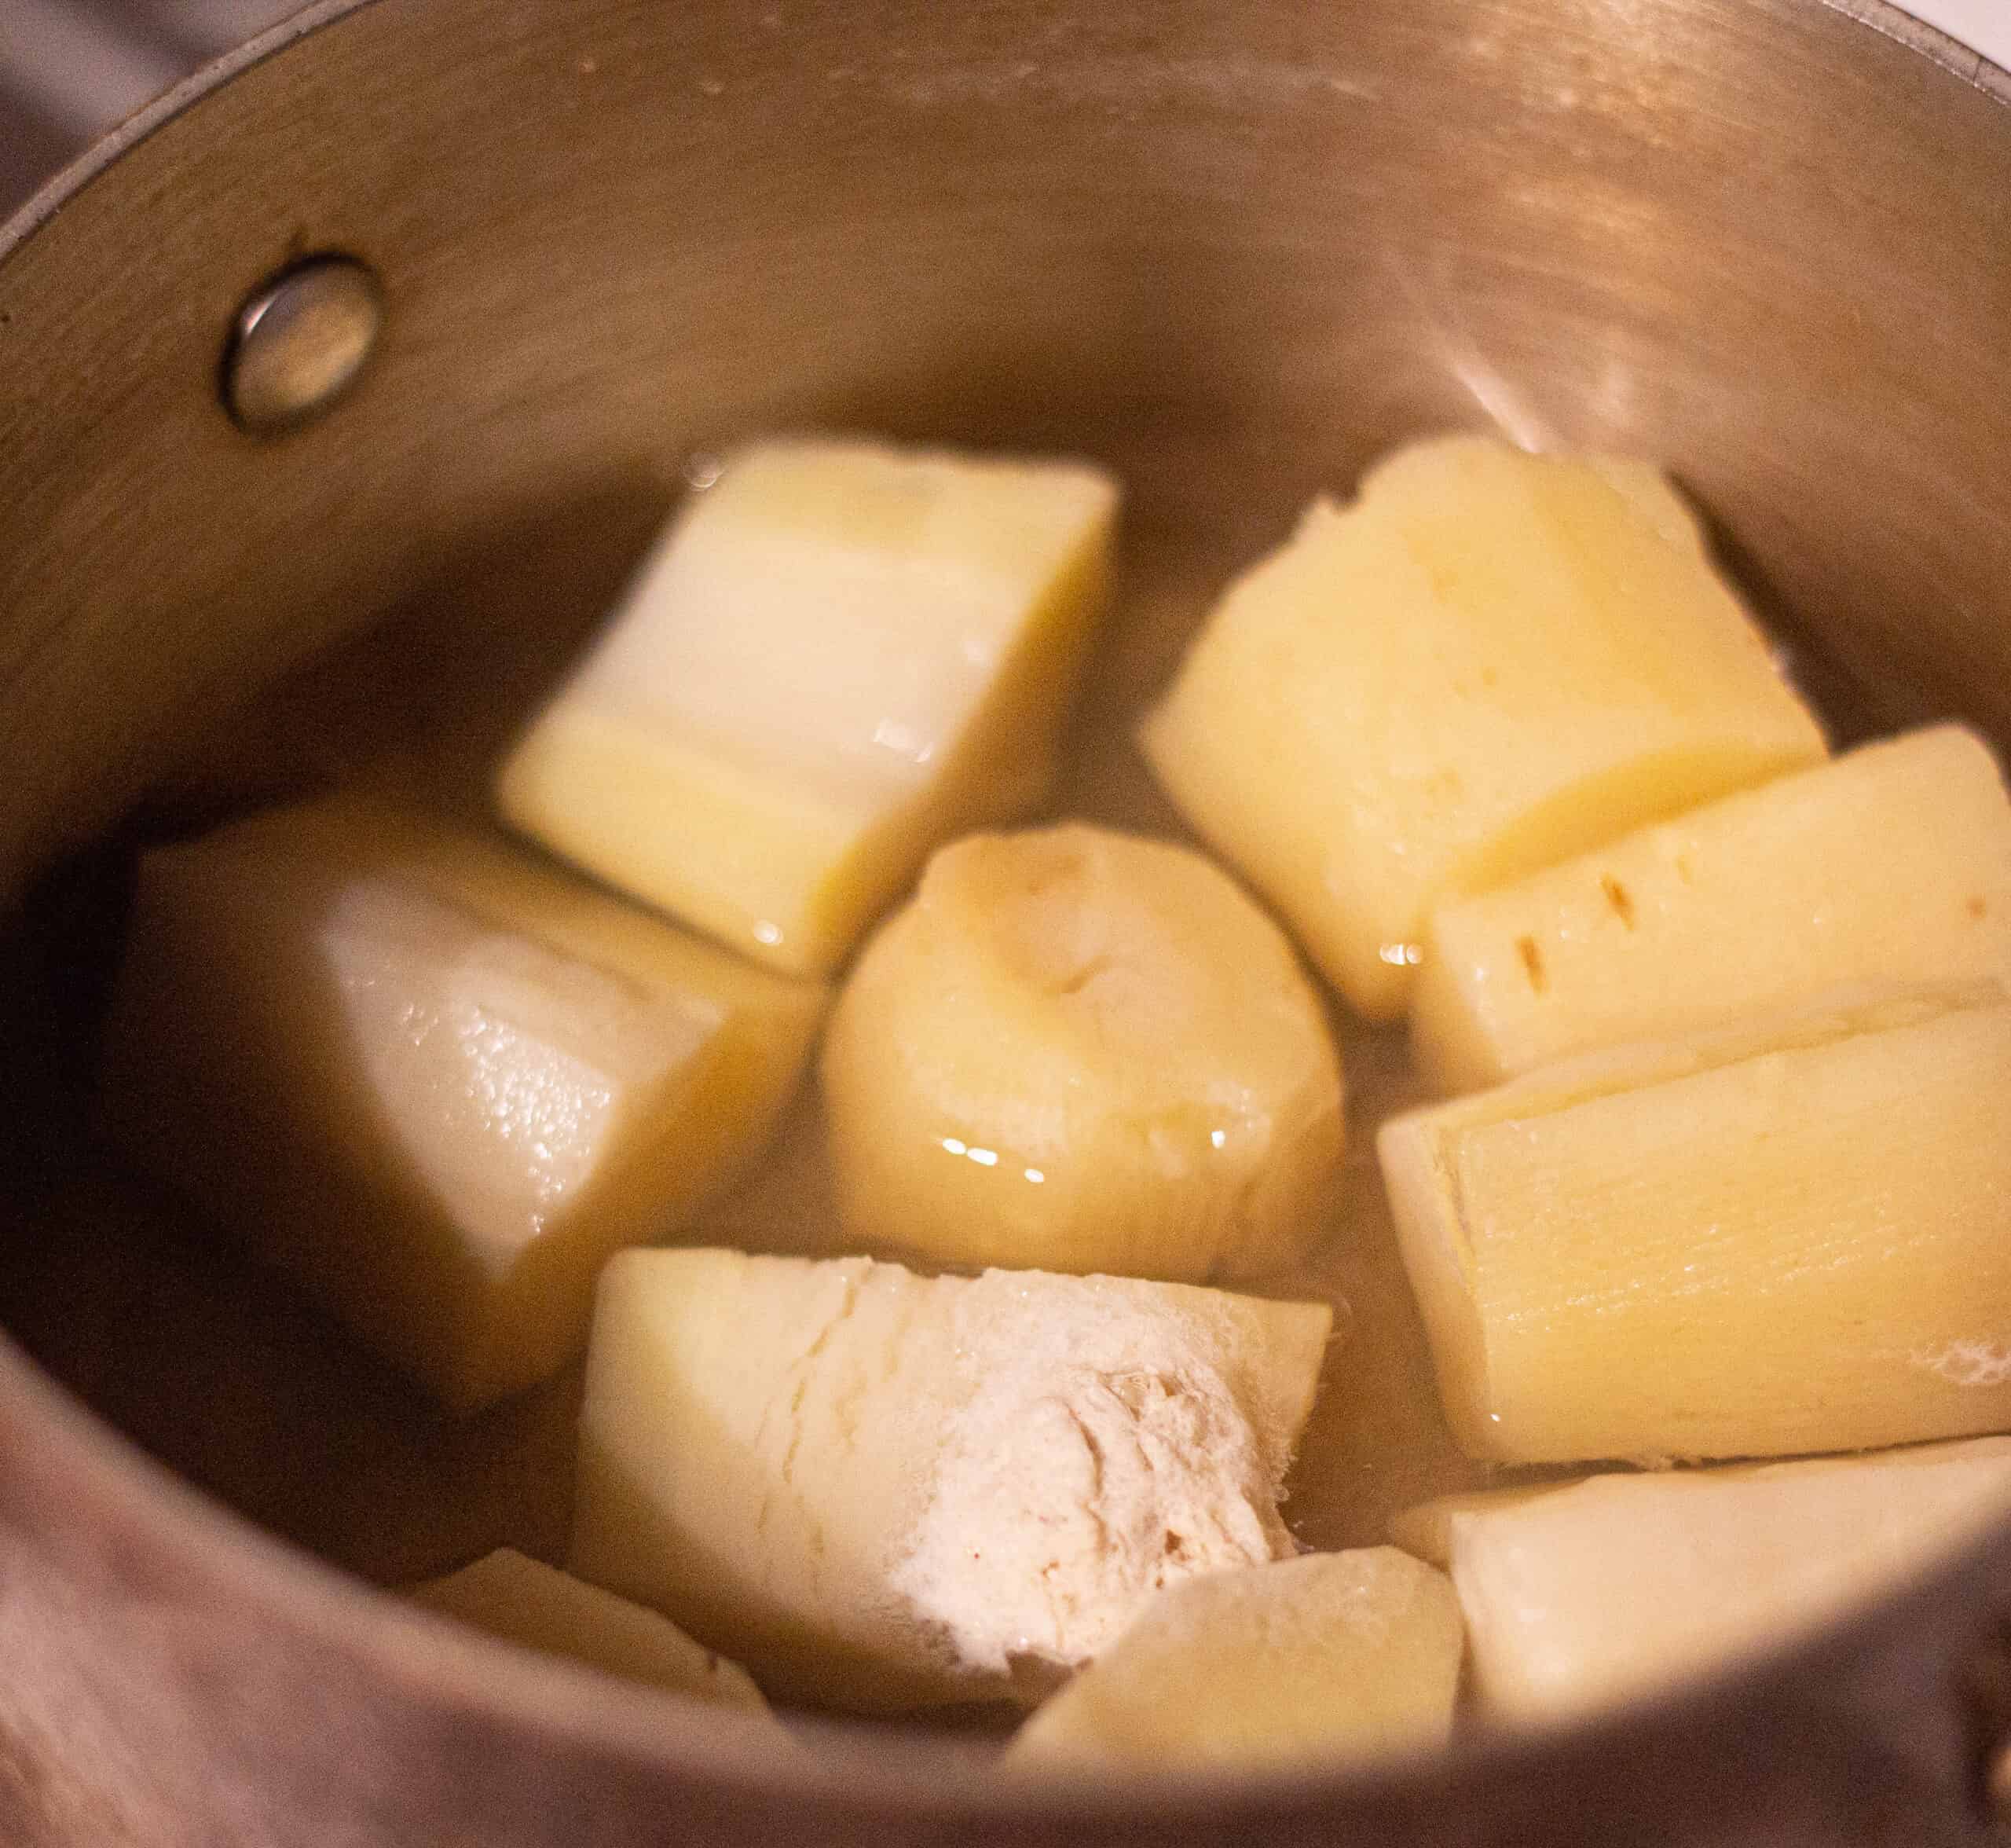 Boiling parsnips